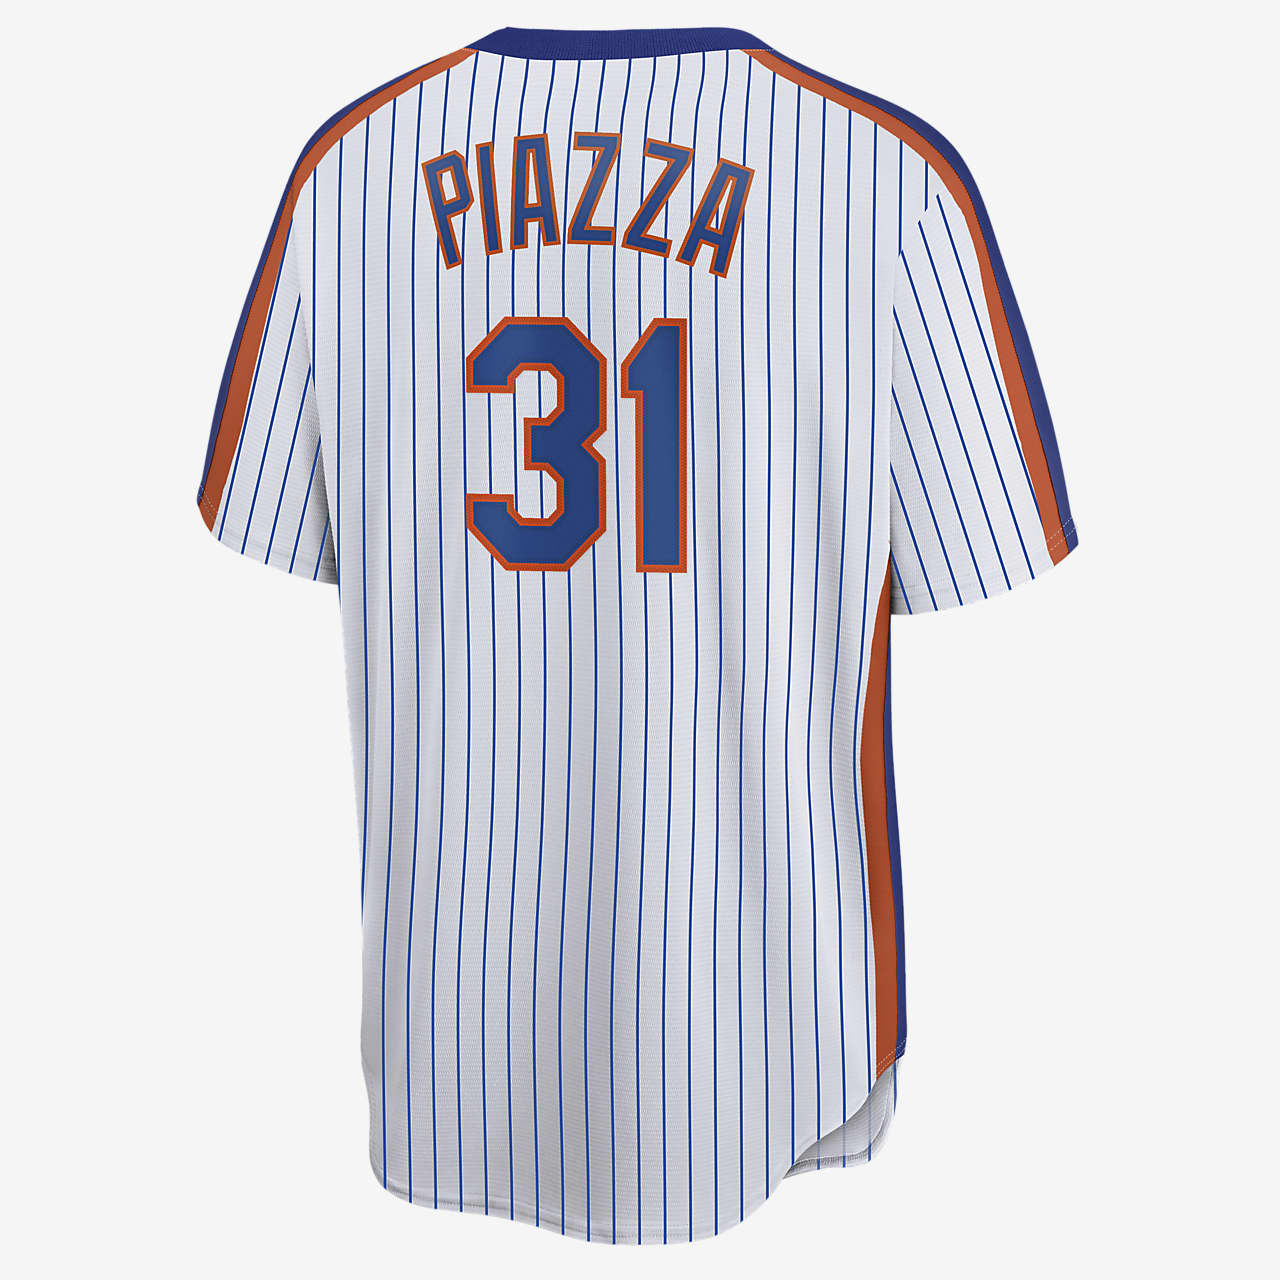 ny mets mike piazza jersey